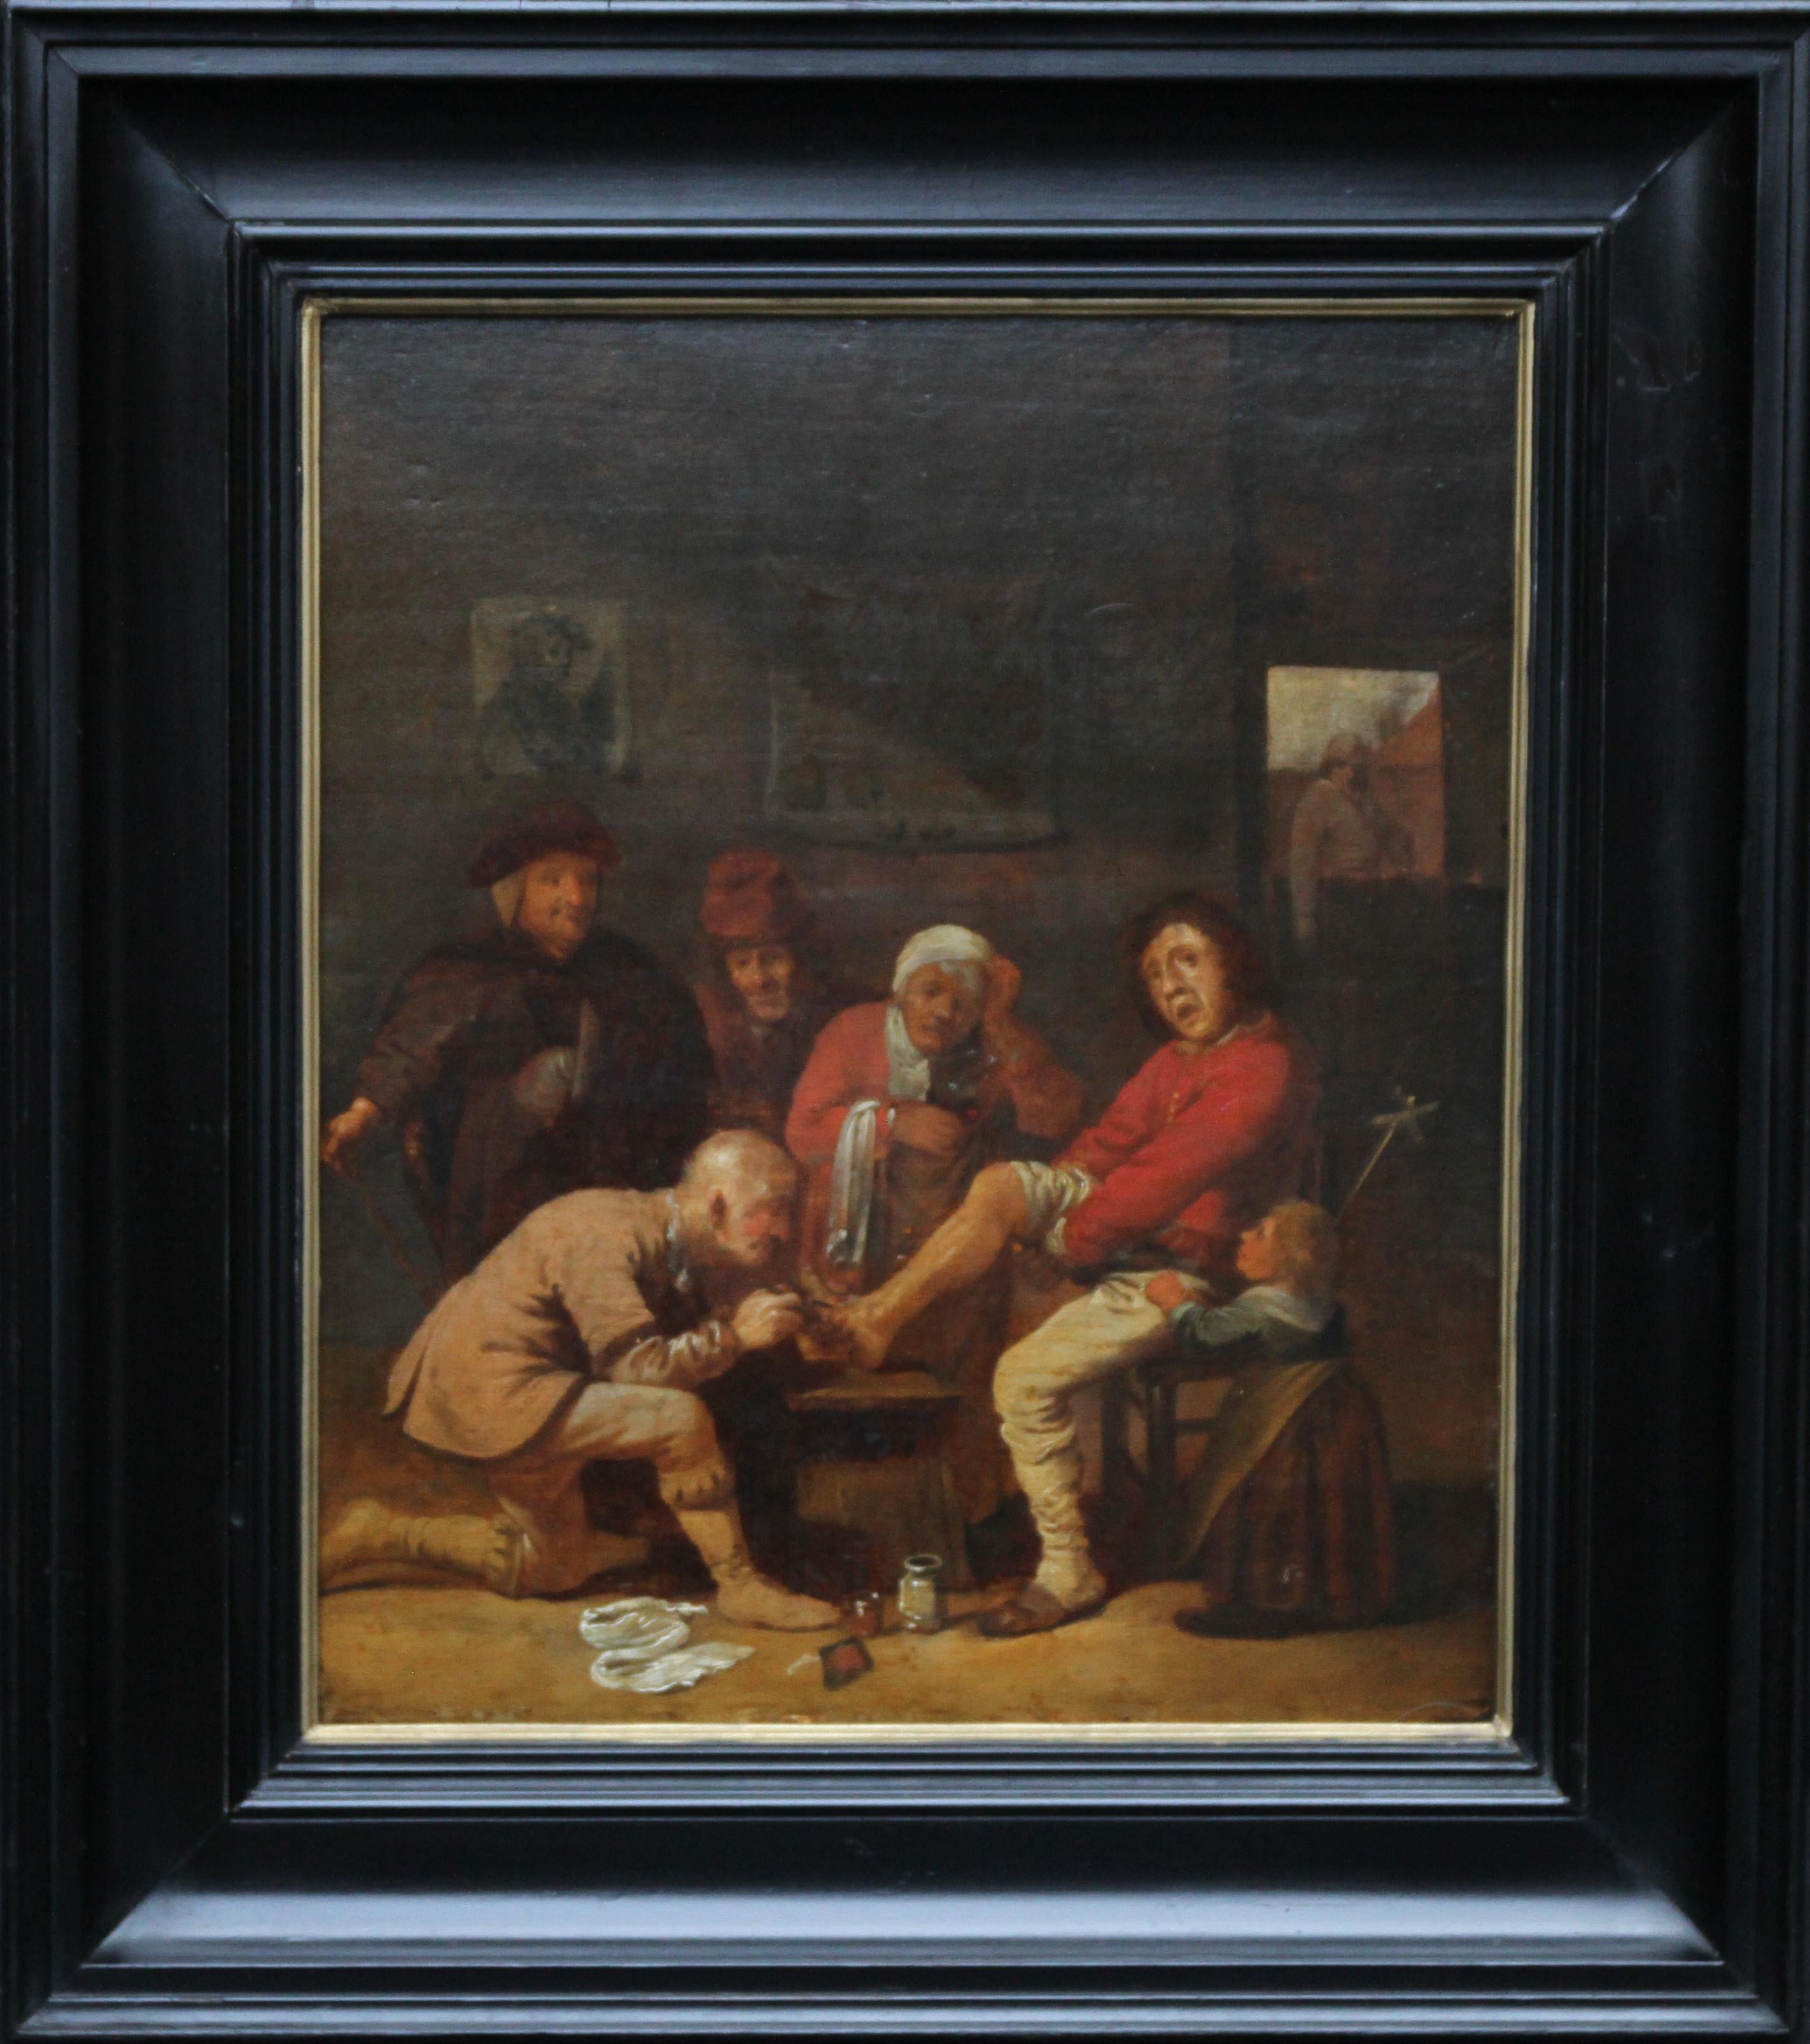 A Surgeon Attending to his Patient's Foot - Dutch 17thC Old Master oil painting 3